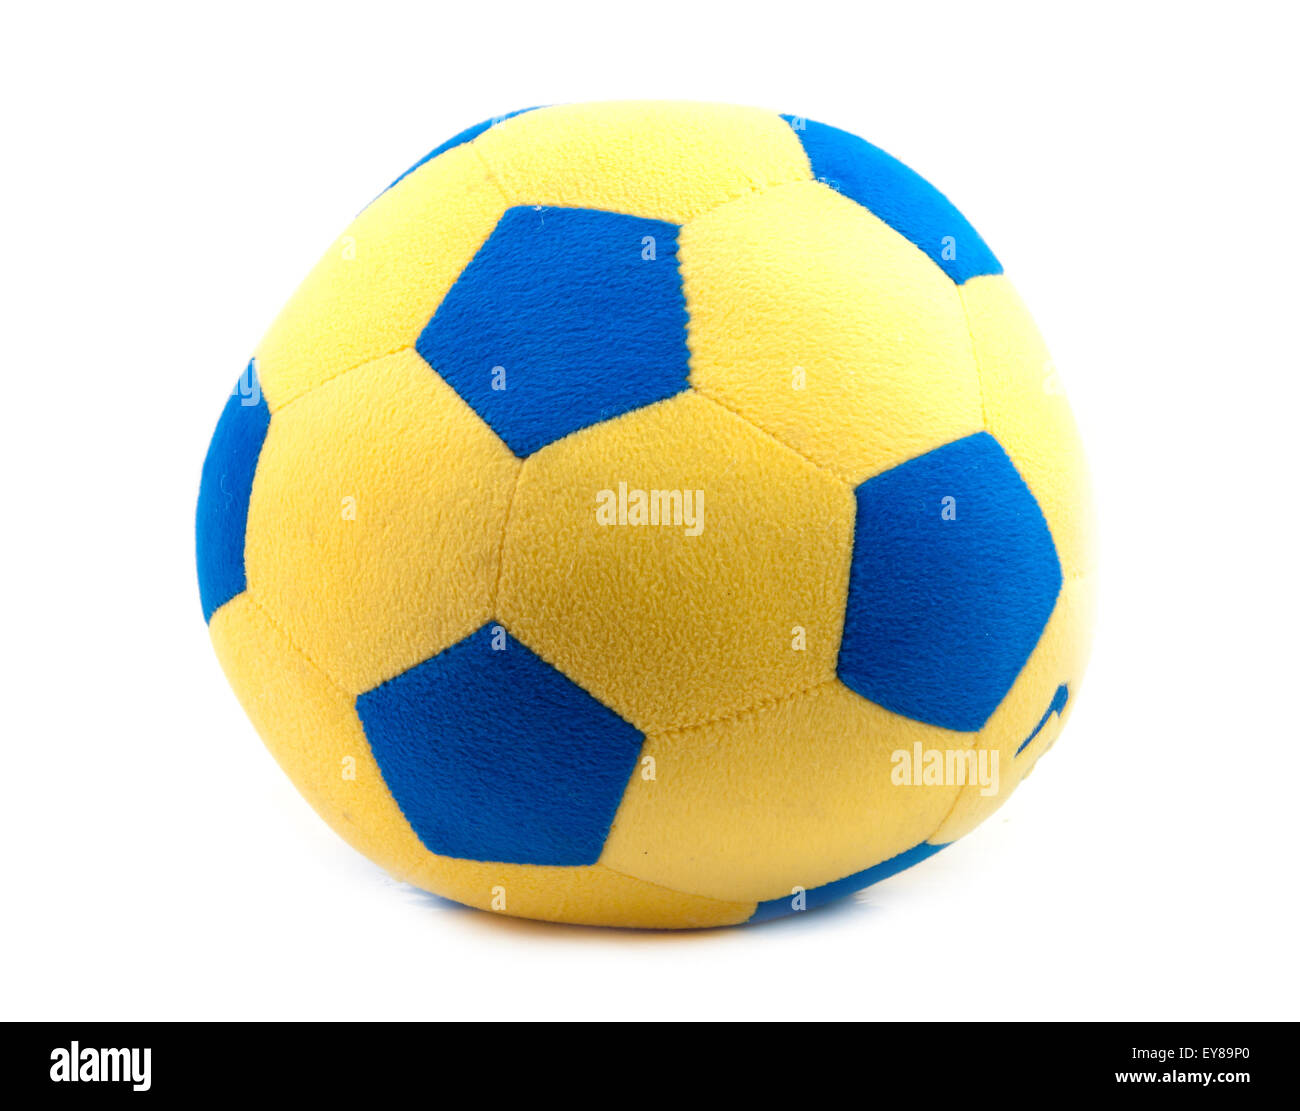 balls soft soccer for playing indoor Stock Photo